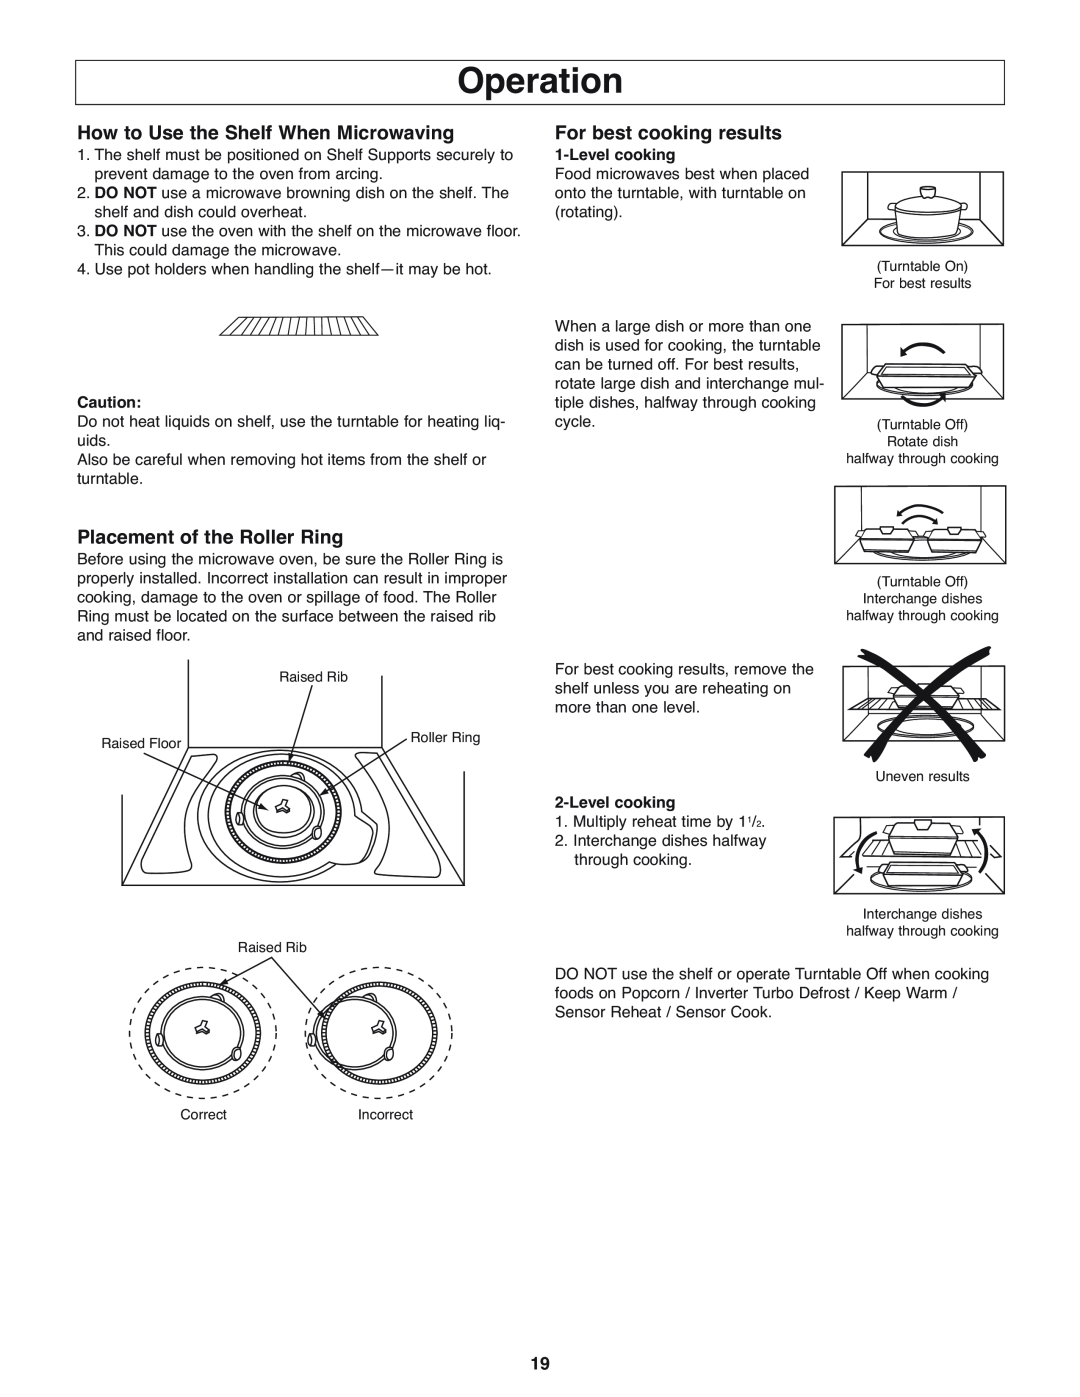 Panasonic NN-H275 Operation, How to Use the Shelf When Microwaving, For best cooking results, Placement of the Roller Ring 